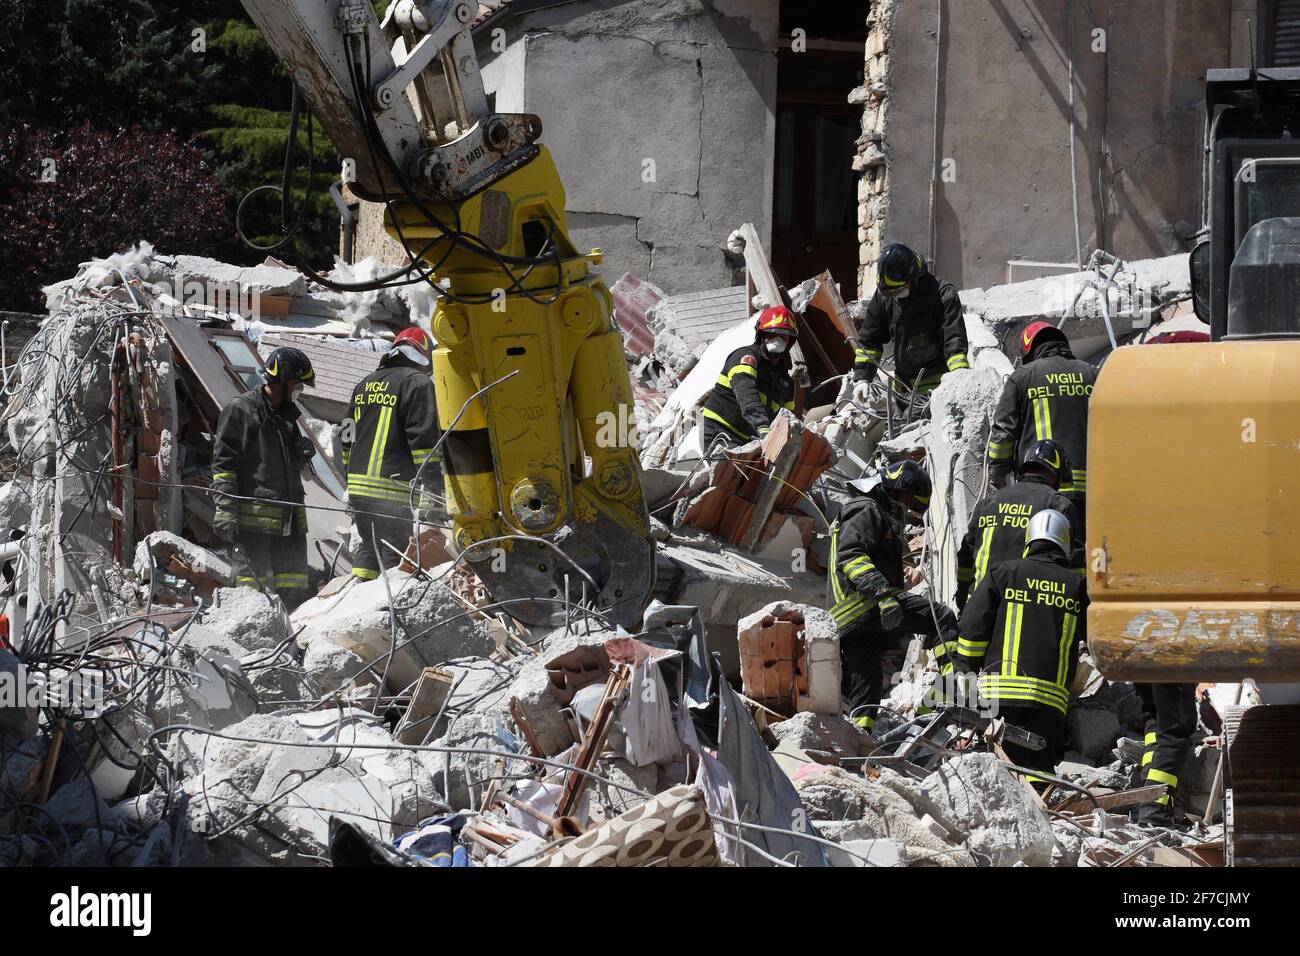 L'Aquila, Italy - April 6, 2009: Rescuers at work in the rubble of the city destroyed by the earthquake Stock Photo